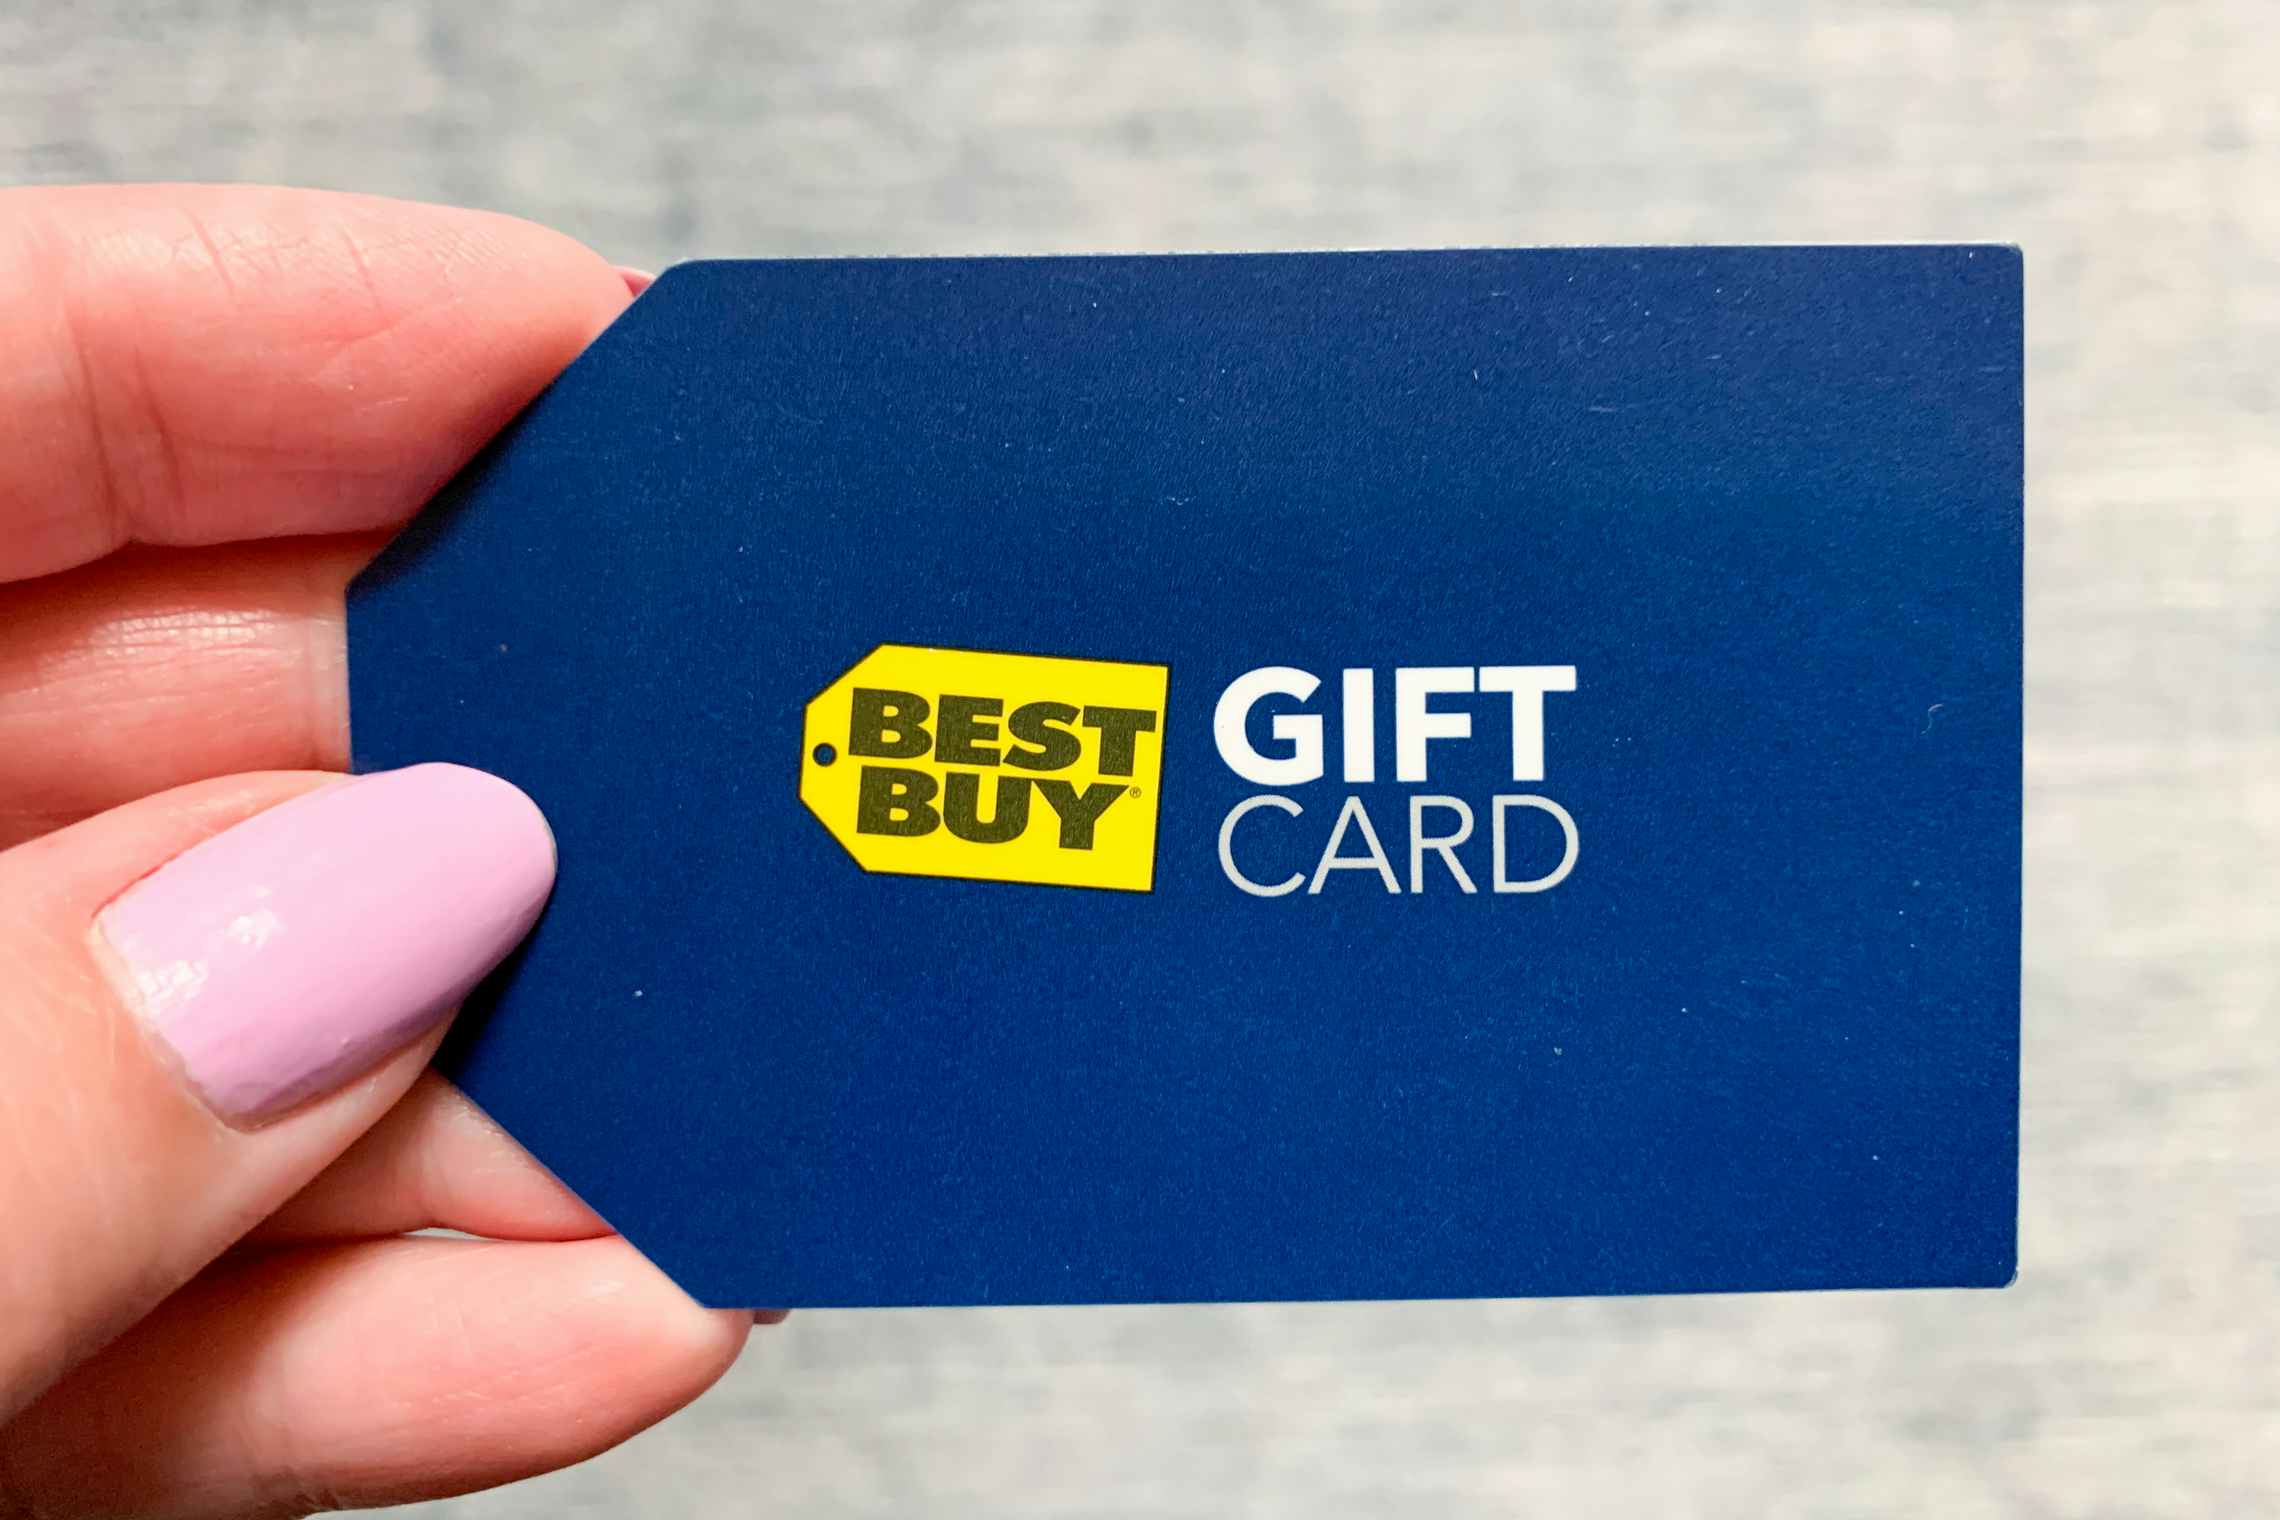 FREE $20 Best Buy Gift Card w/ Purchase of a $100 Sephora eGift Card